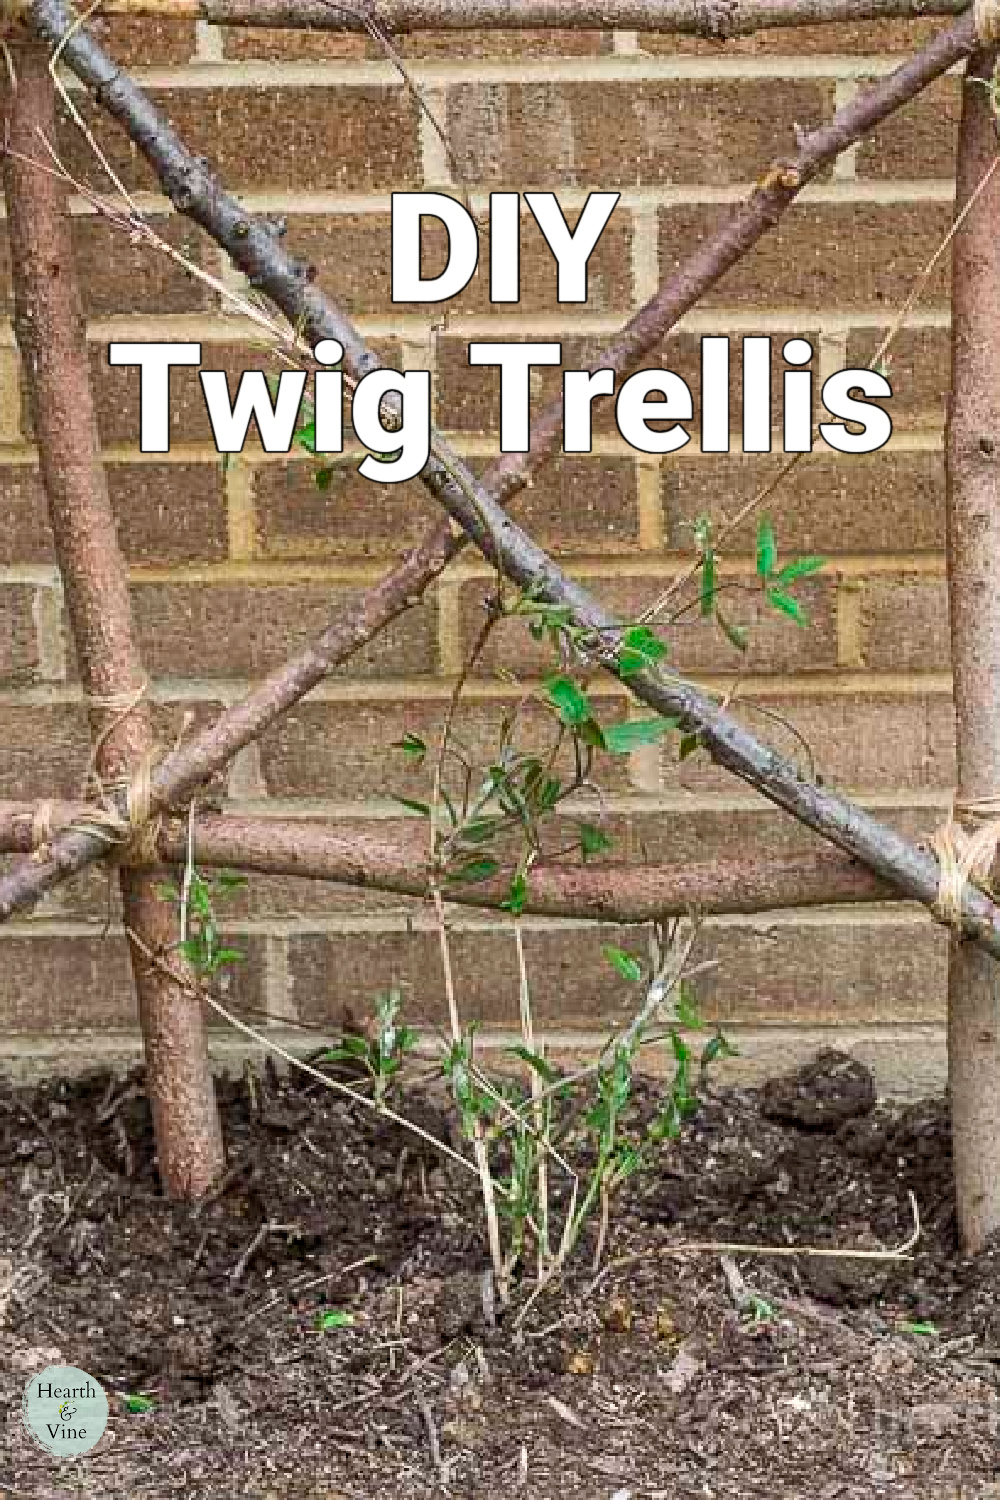 Trellis made from twigs, branches and twine with a clematis plant growing up it.